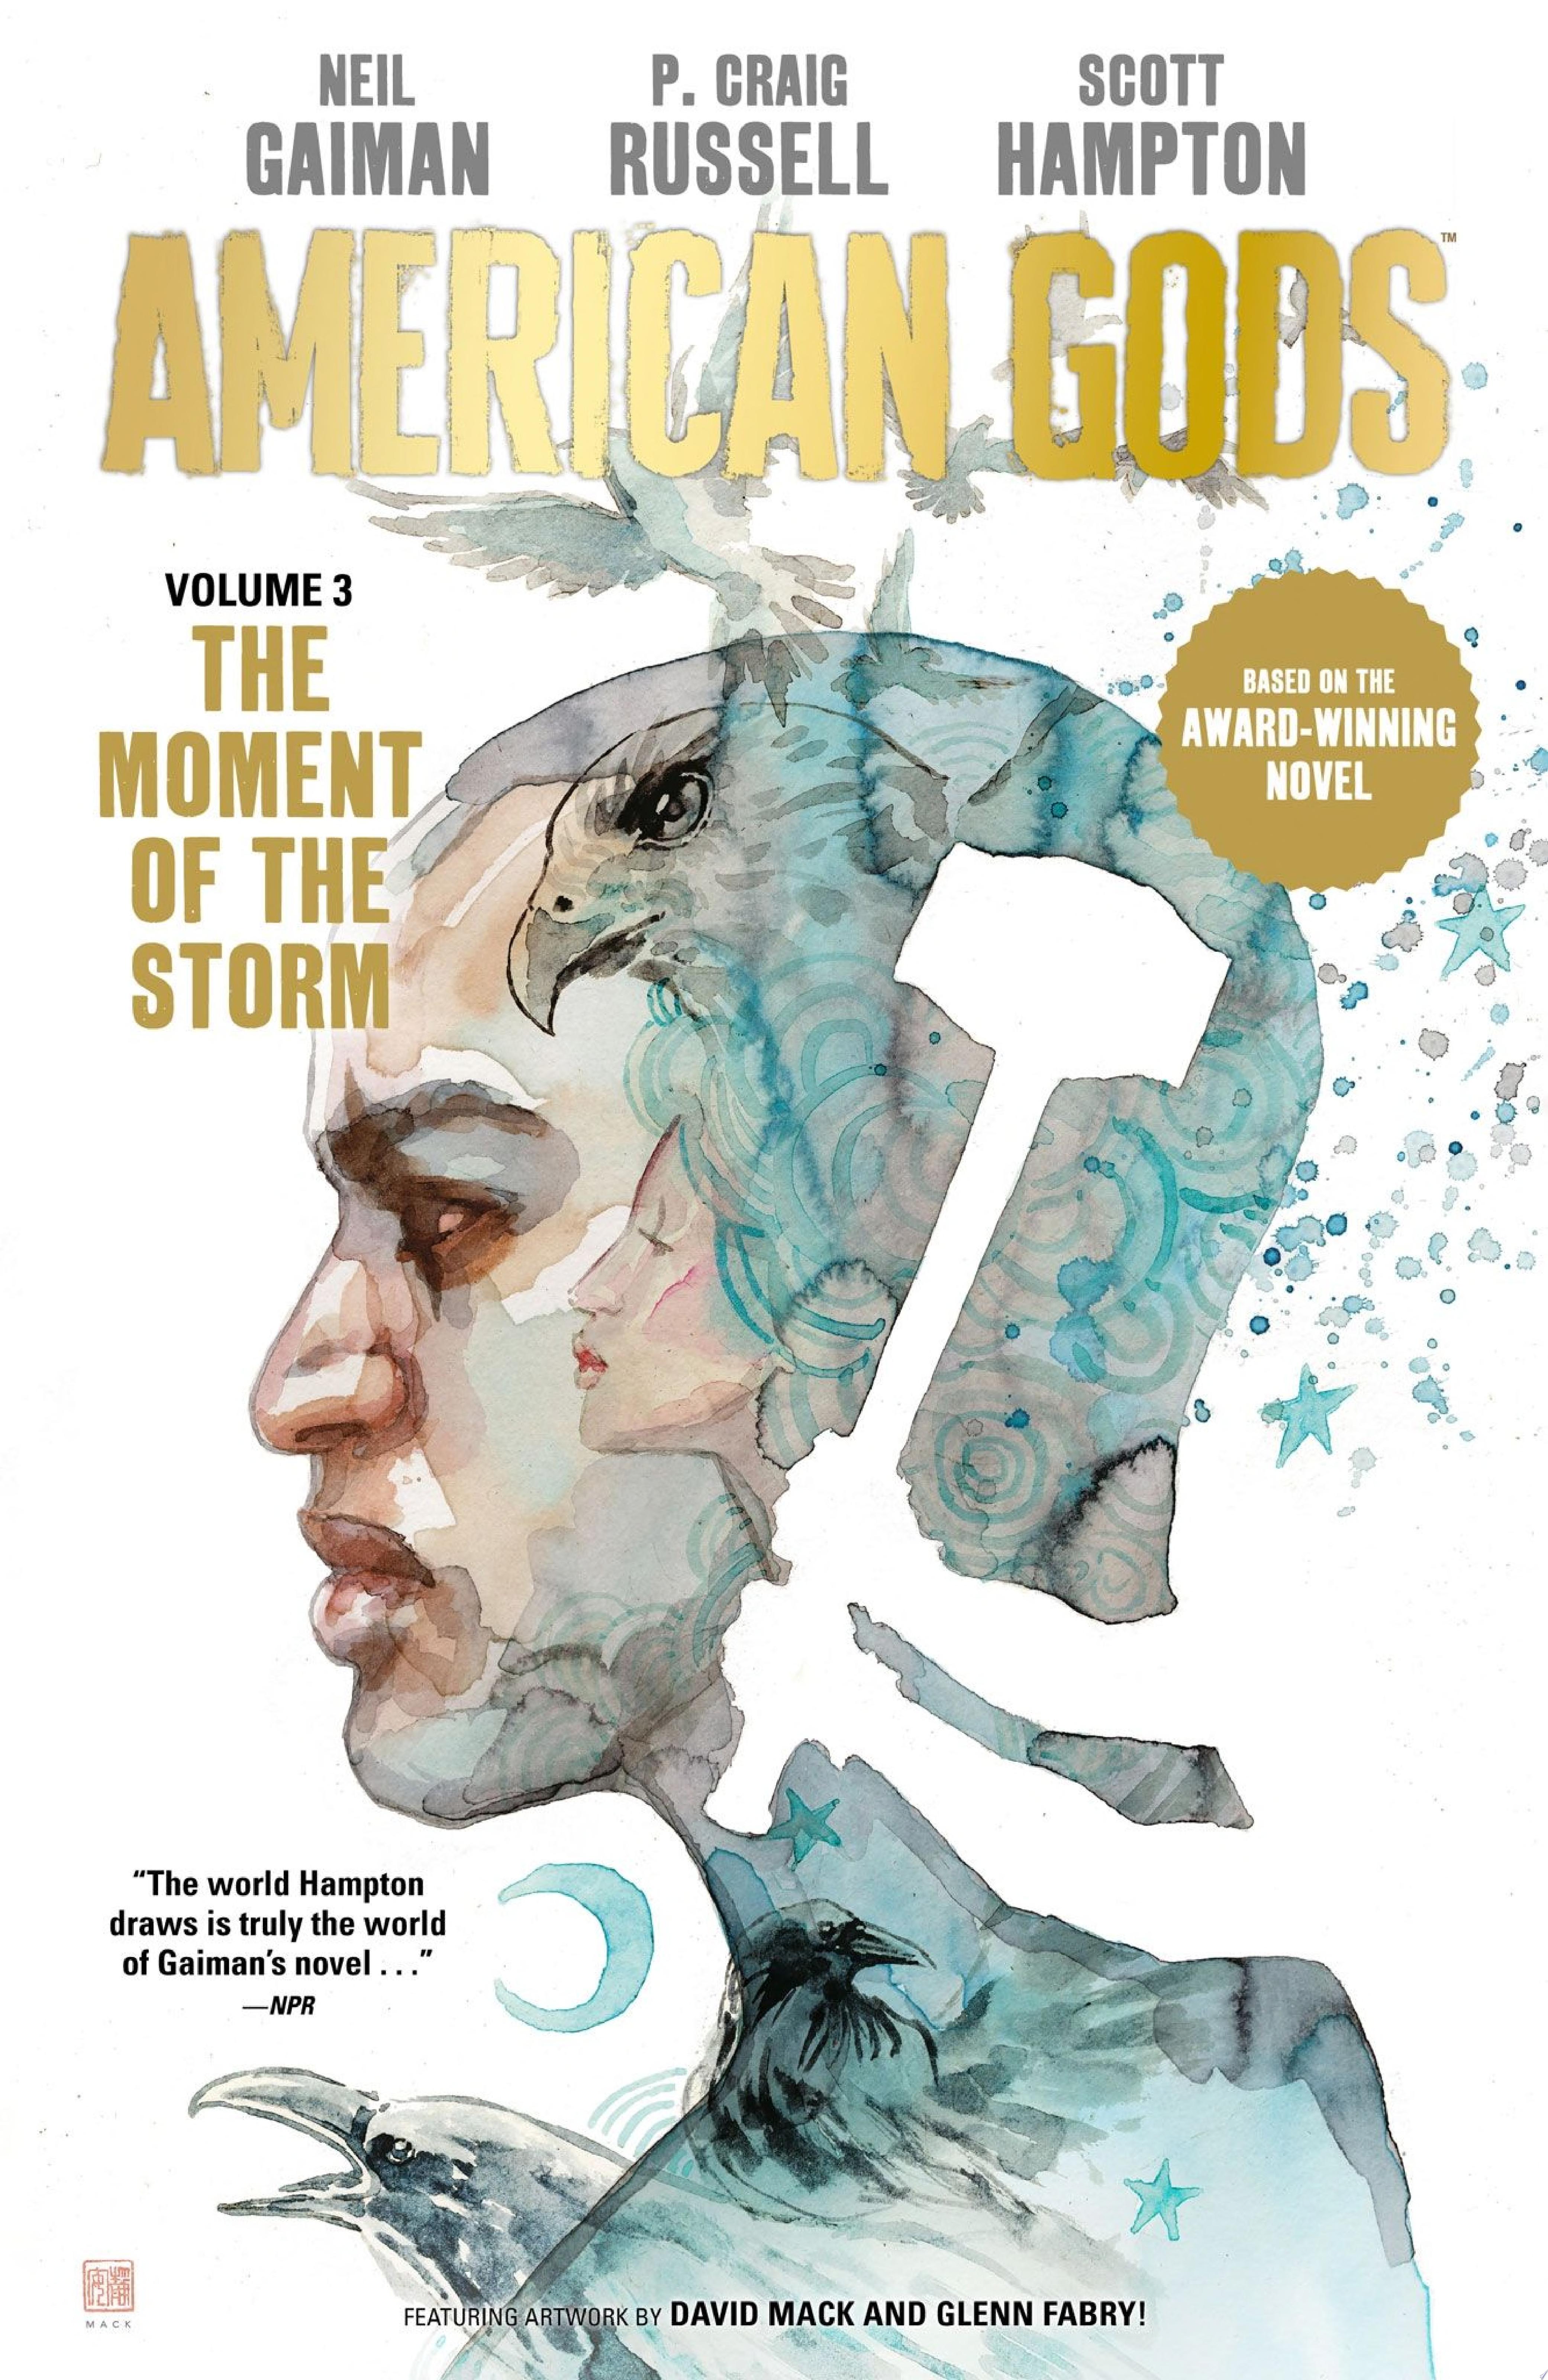 Image for "American Gods Volume 3: The Moment of the Storm (Graphic Novel)"